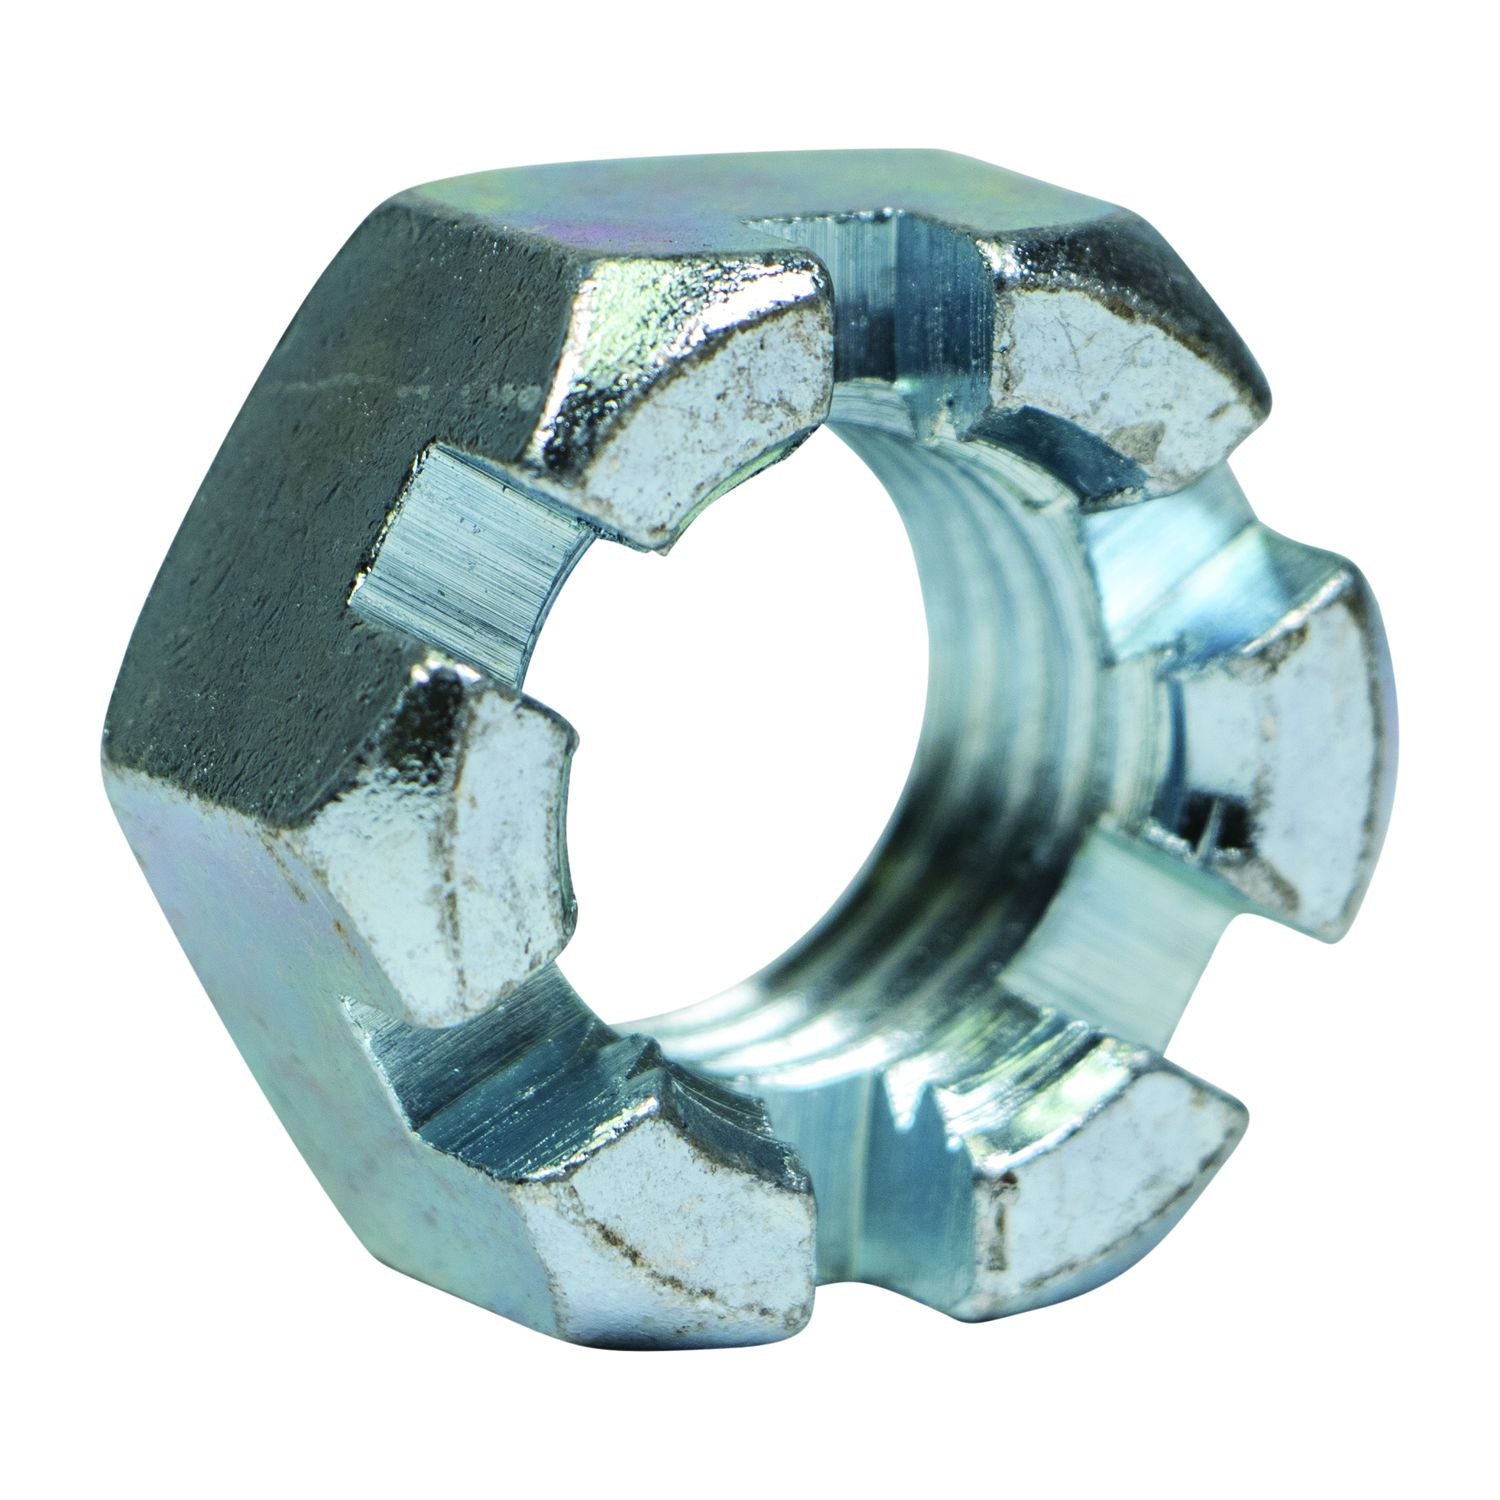 Axle Spindle Hardware - Spindl